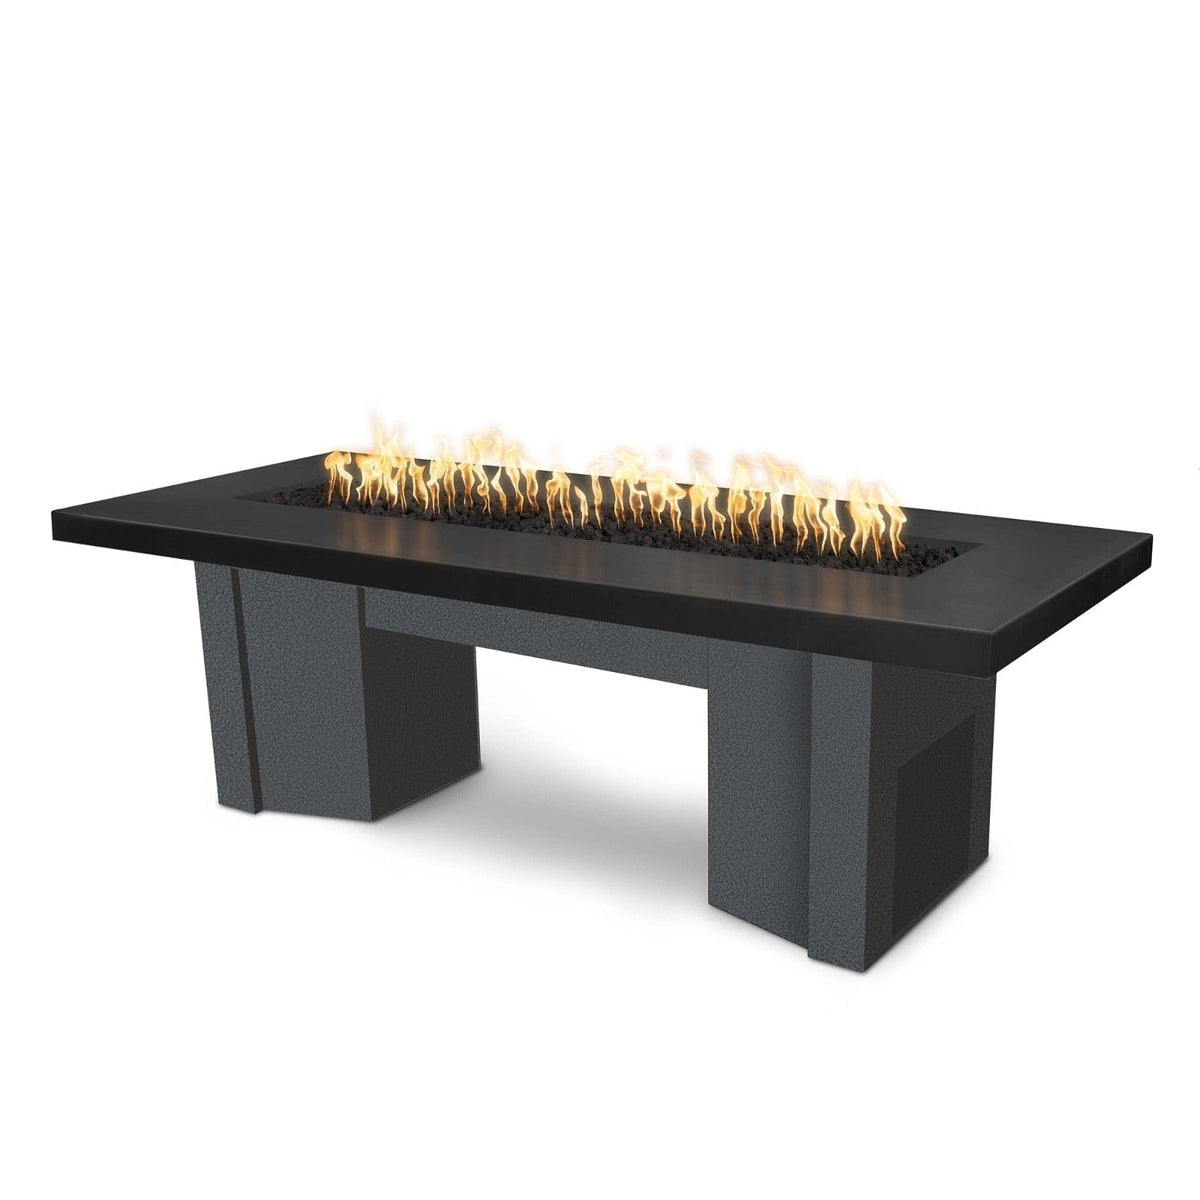 The Outdoor Plus Fire Features Black (-BLK) / Silver Vein Powder Coated Steel (-SLV) The Outdoor Plus 60&quot; Alameda Fire Table Smooth Concrete in Natural Gas - Flame Sense System with Push Button Spark Igniter / OPT-ALMGFRC60FSEN-NG